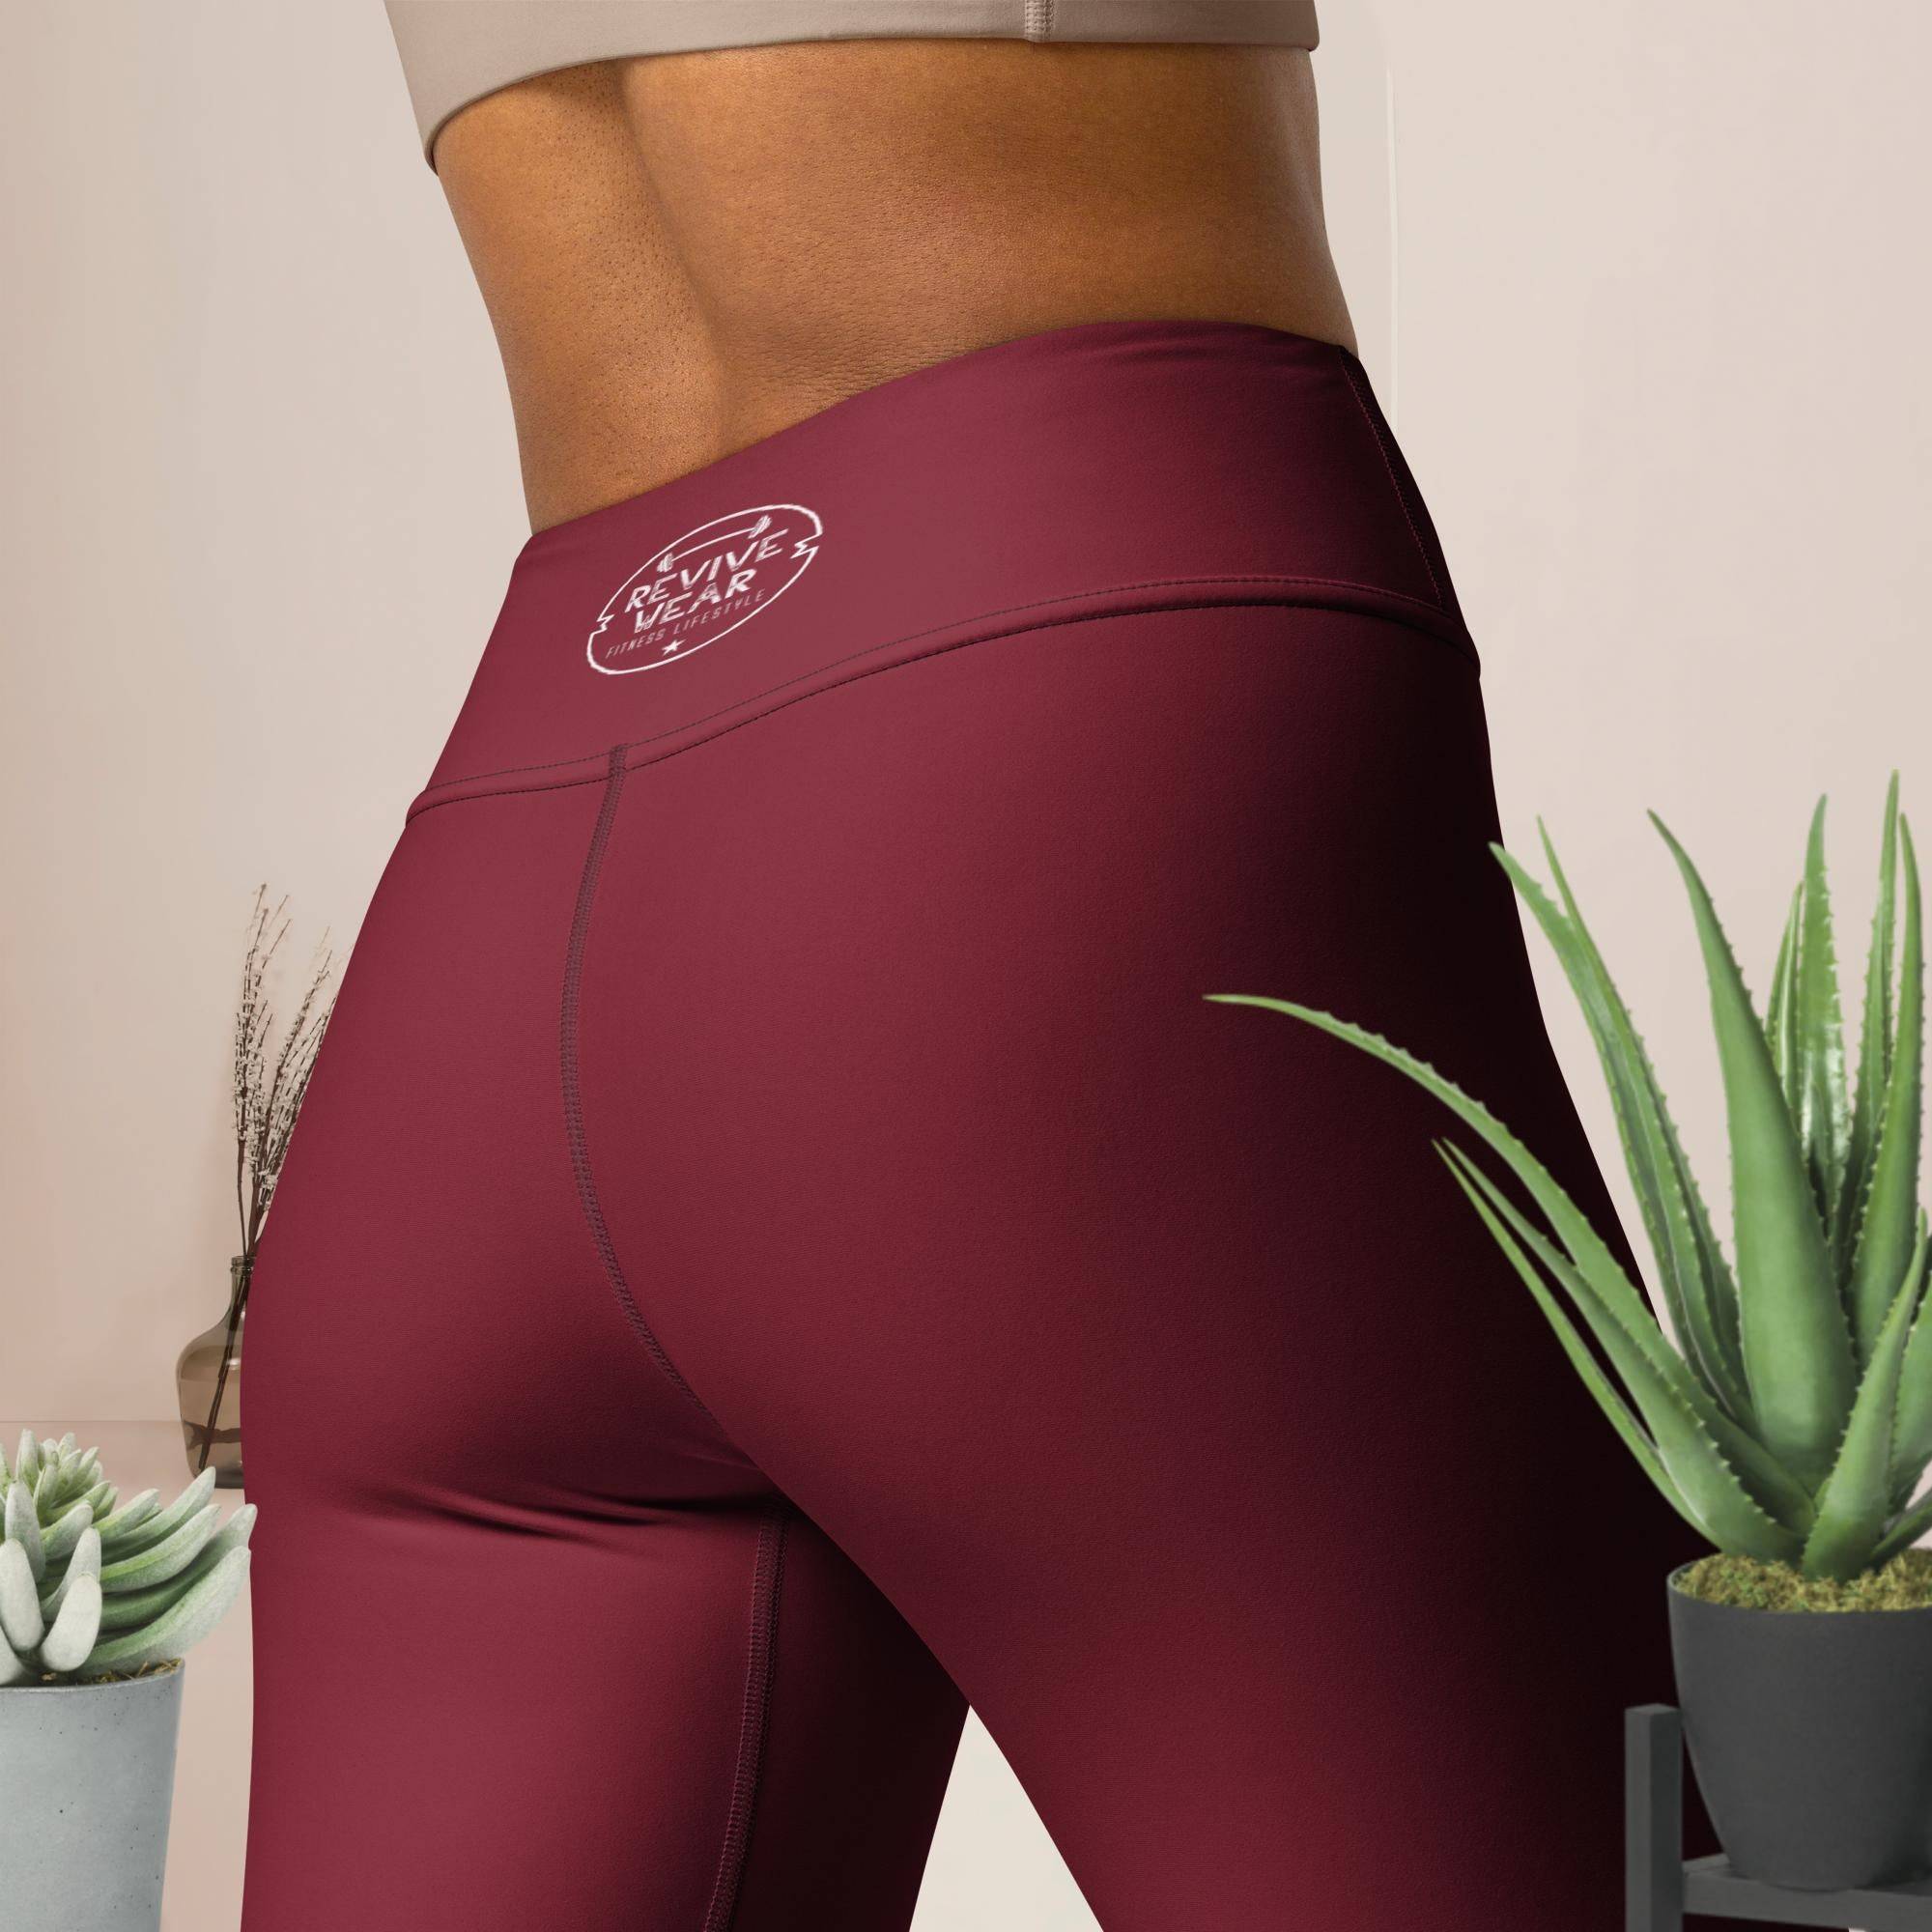 Red Floral Blossom Yoga Workout Leggings - Revive Wear     undefined